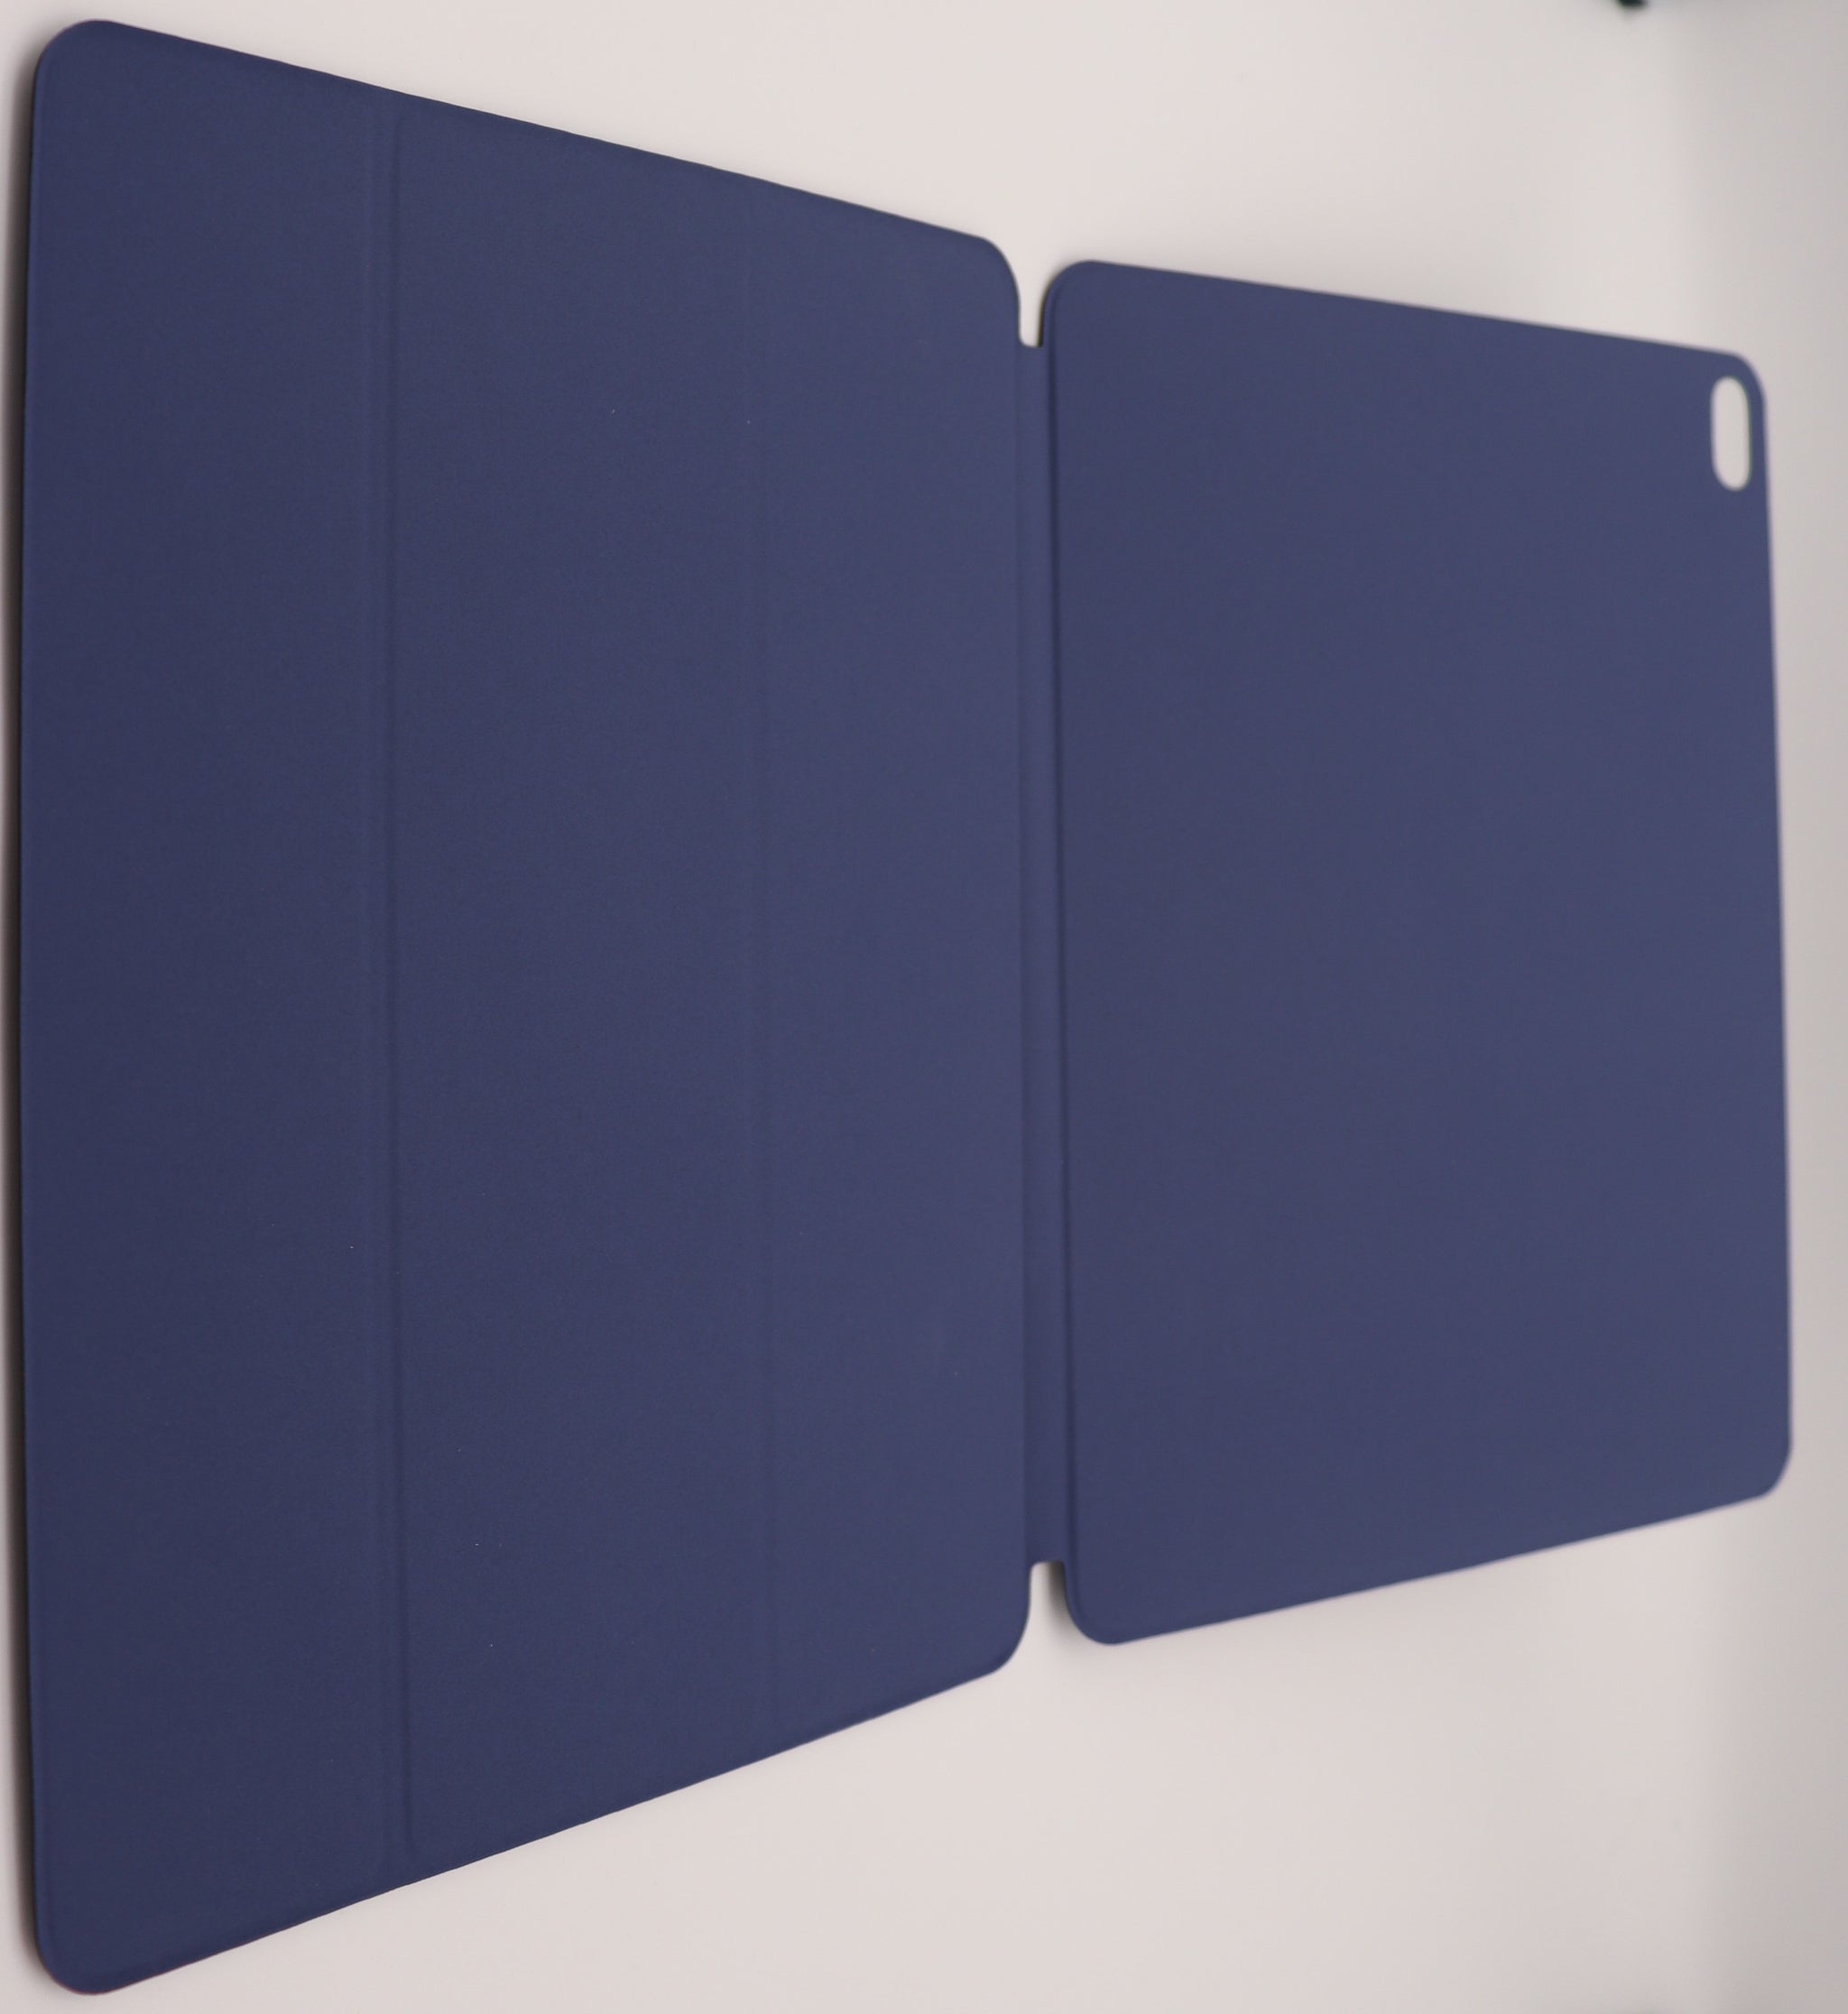 Magneto - Magnetic Cover/Case for various iPad (Tablet) models